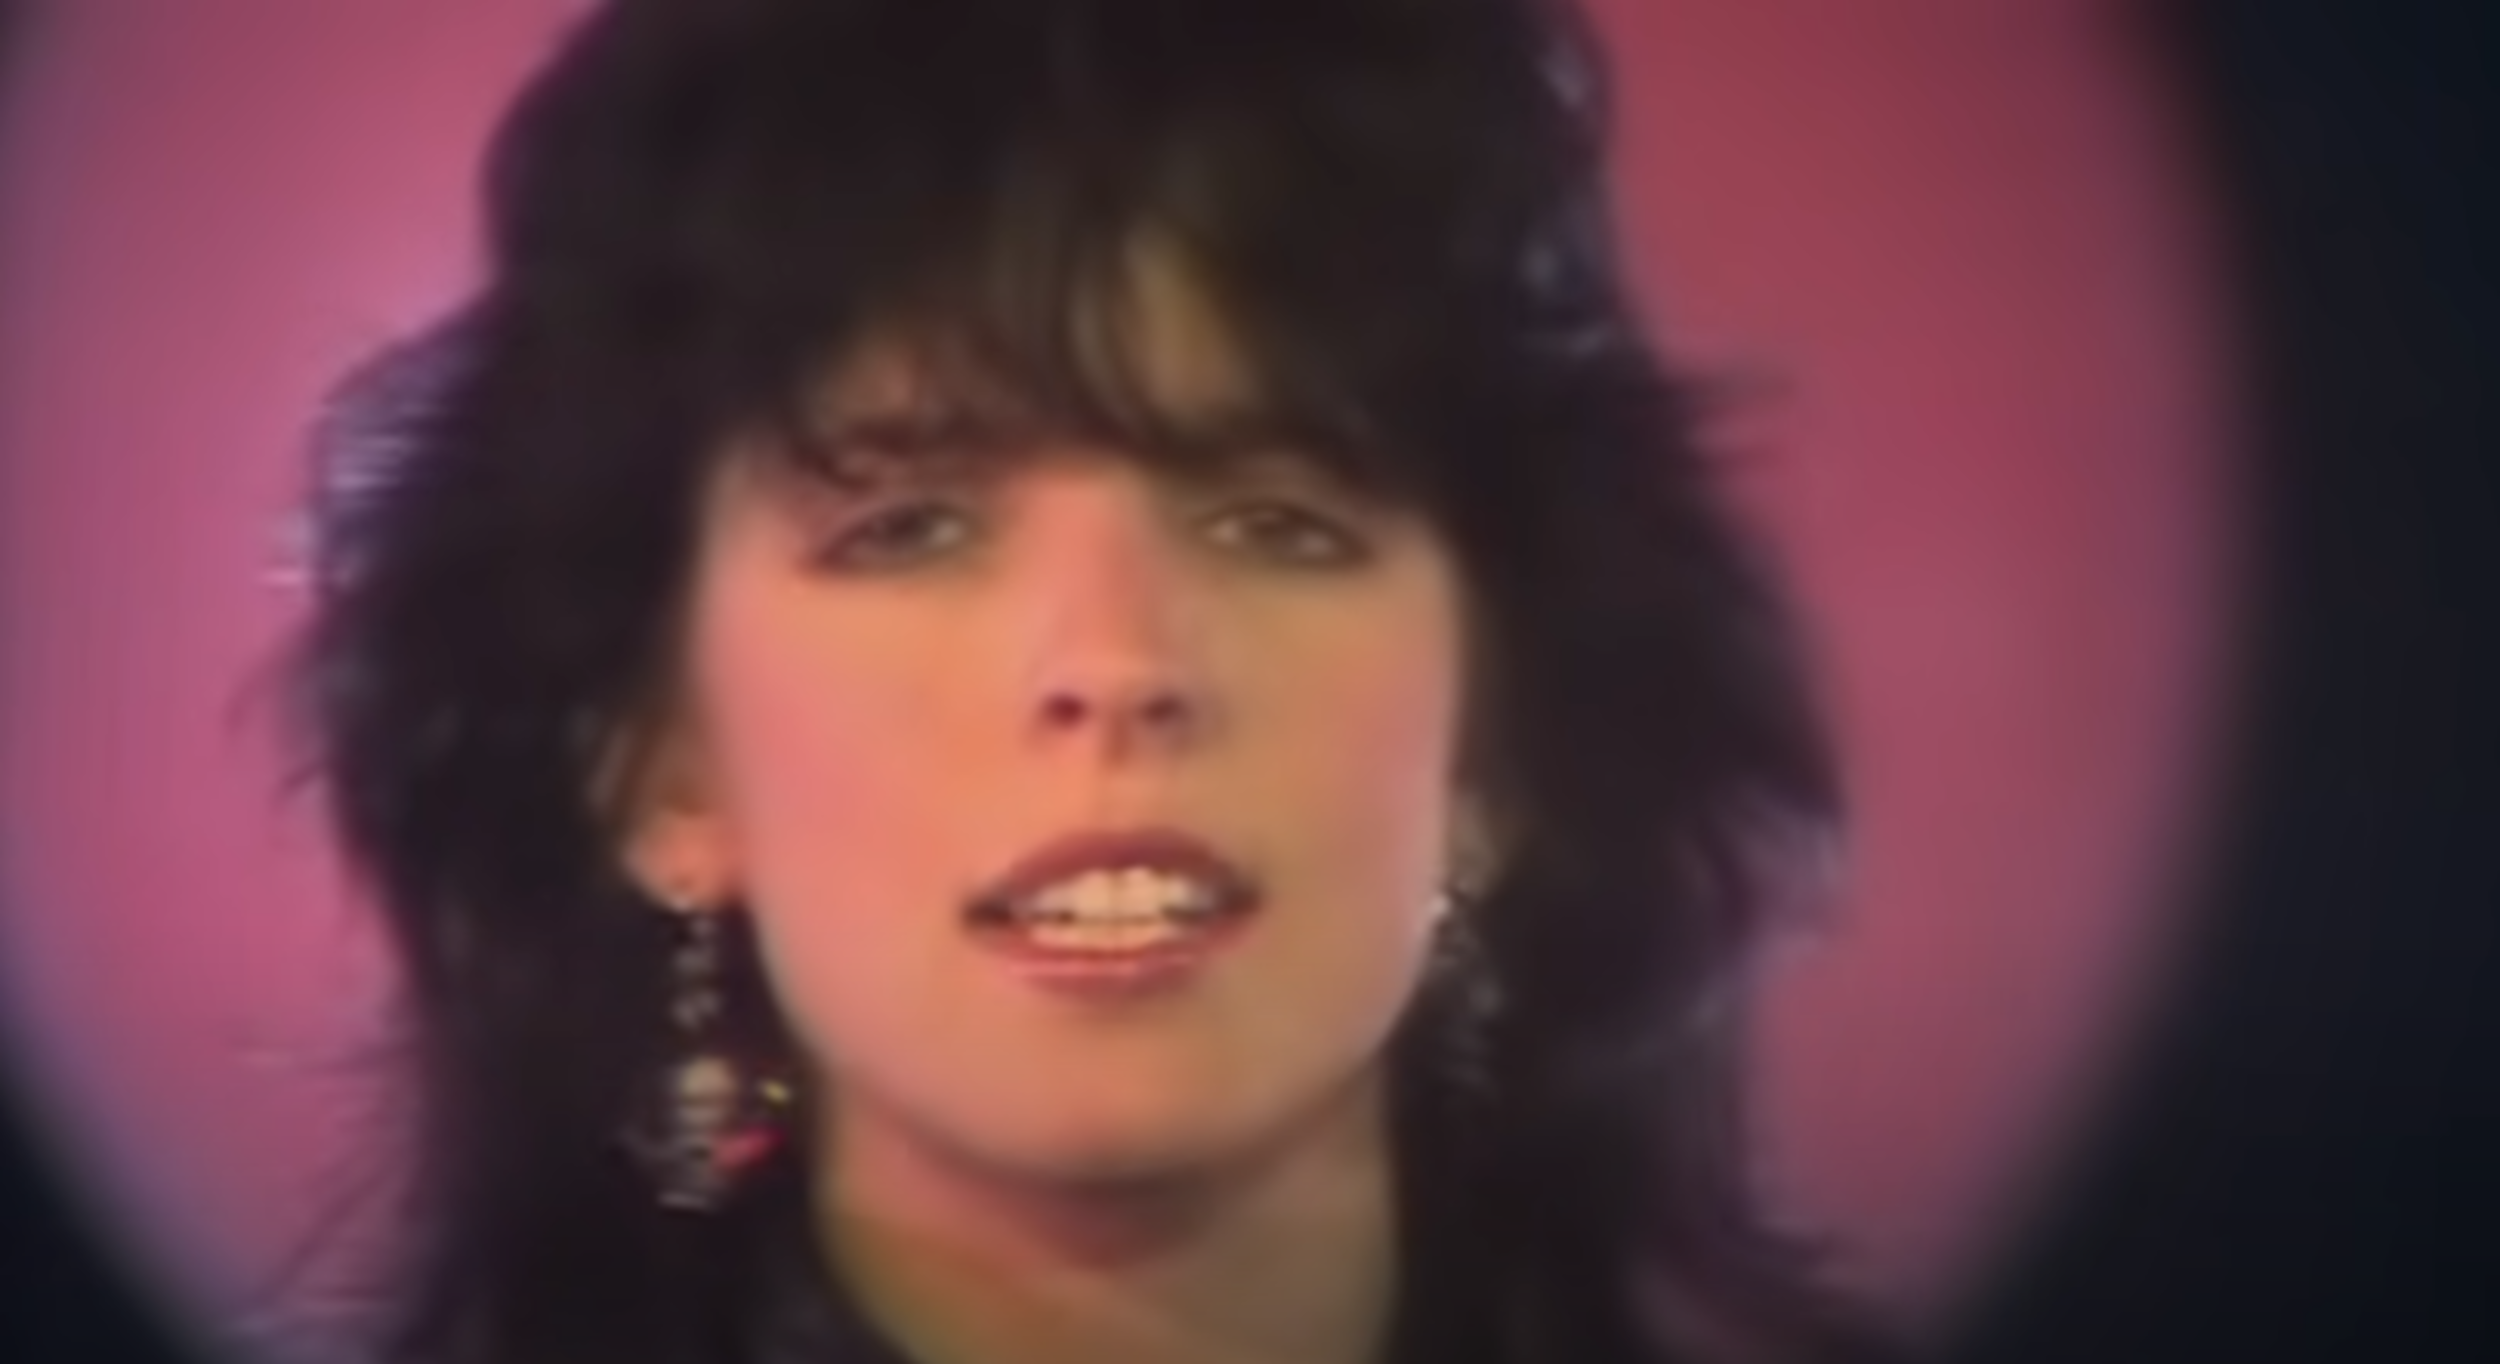 <p>In 1983, German-based Nena released <a href="https://www.youtube.com/watch?v=Fpu5a0Bl8eY">"99 Luftballons,"</a> a somewhat politically influenced track, on its self-titled debut album in West Germany. In '84, an English version of the same song, <a href="https://www.youtube.com/watch?v=hiwgOWo7mDc">"99 Red Balloons" </a>was released in the U.S. The former peaked at No. 2 in the States, but the English version was also popular in America. Regardless of the version, it remains one of the most recognizable songs of the 1980s.</p><p><a href='https://www.msn.com/en-us/community/channel/vid-cj9pqbr0vn9in2b6ddcd8sfgpfq6x6utp44fssrv6mc2gtybw0us'>Follow us on MSN to see more of our exclusive entertainment content.</a></p>